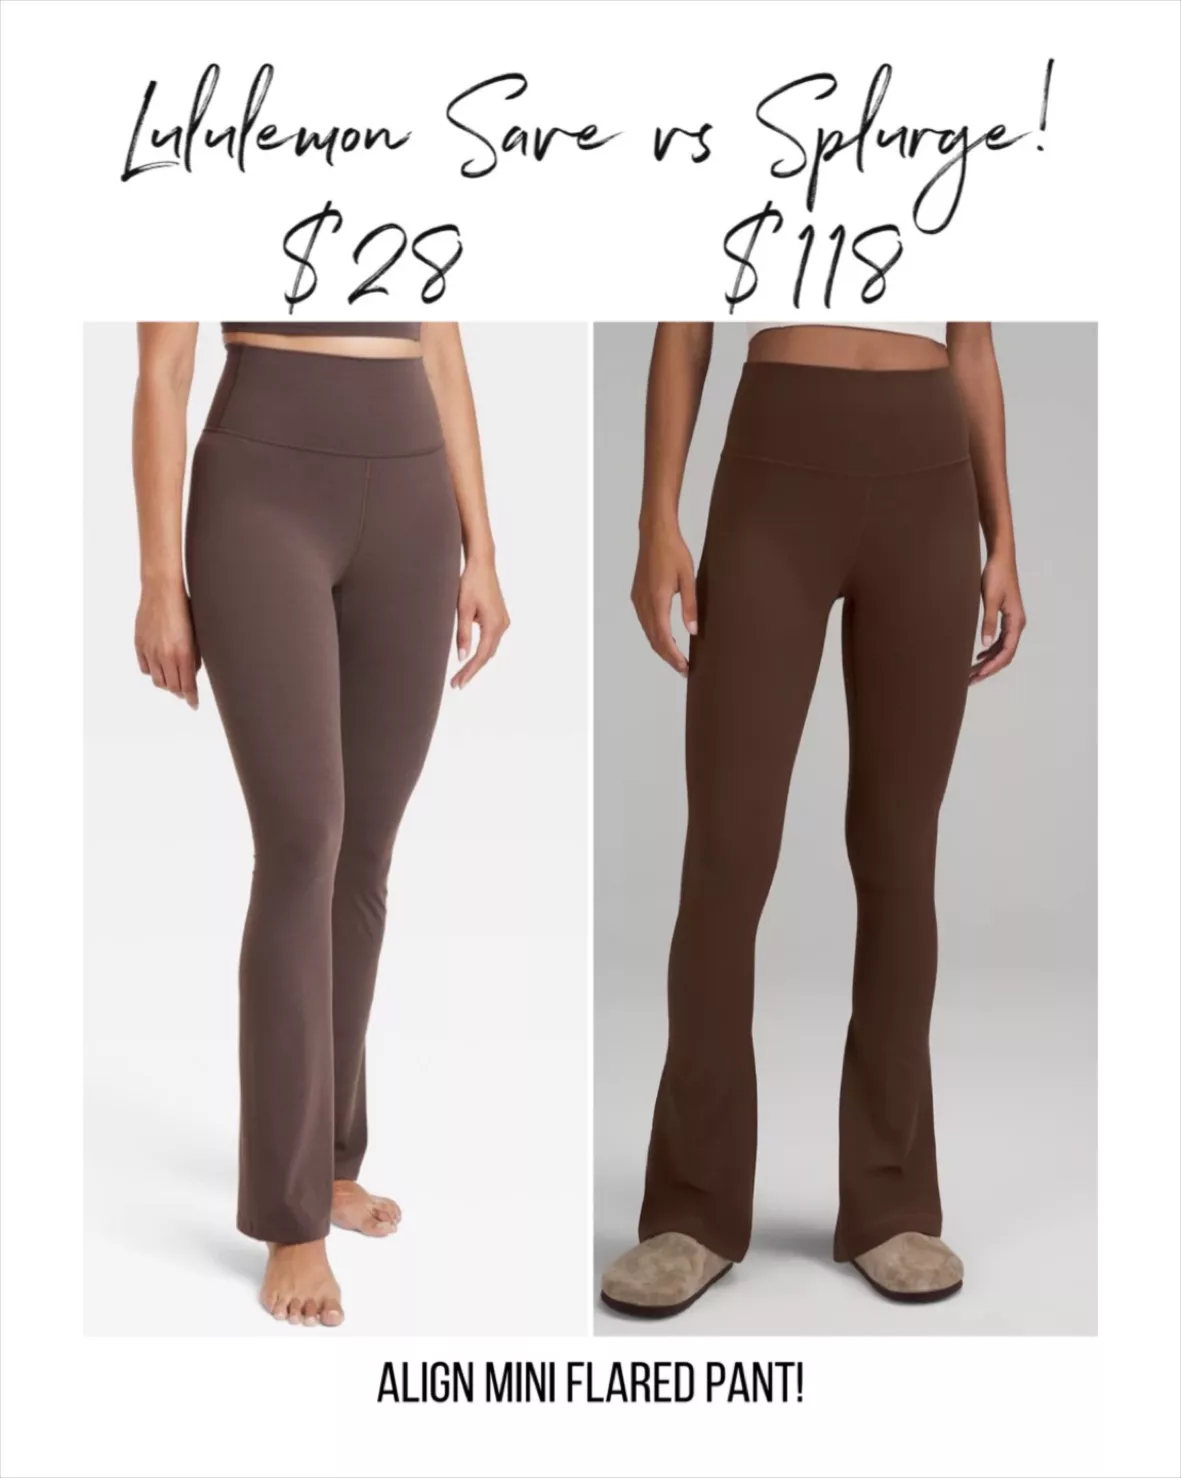 LULULEMON DUPES - WORKOUT LOOKS FOR LESS - VP of STYLE